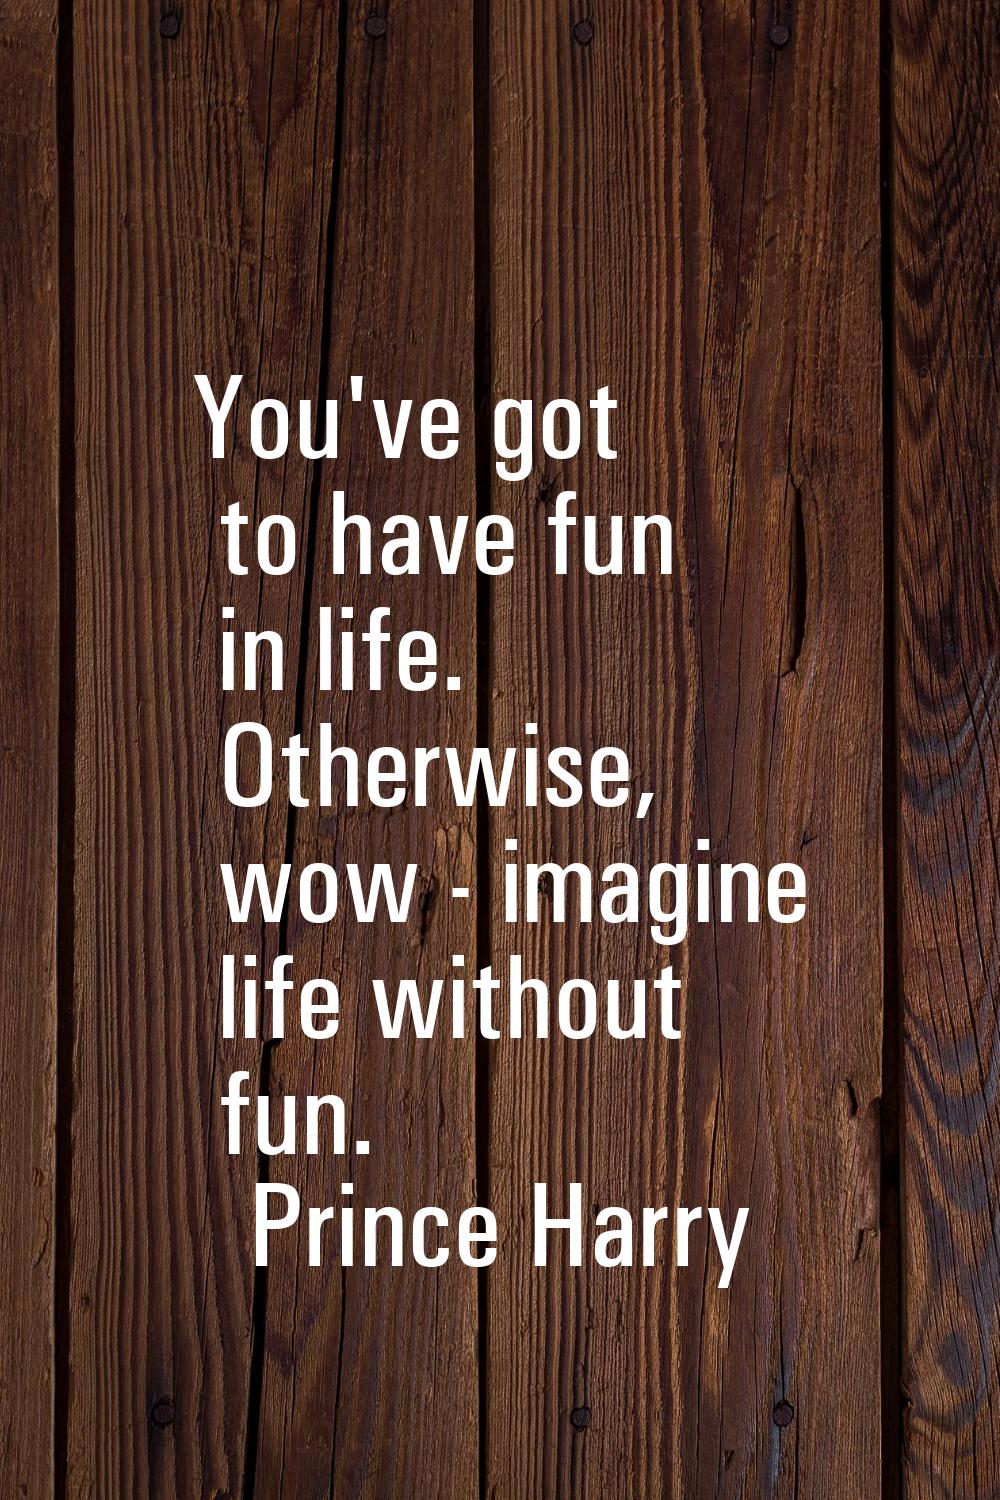 You've got to have fun in life. Otherwise, wow - imagine life without fun.